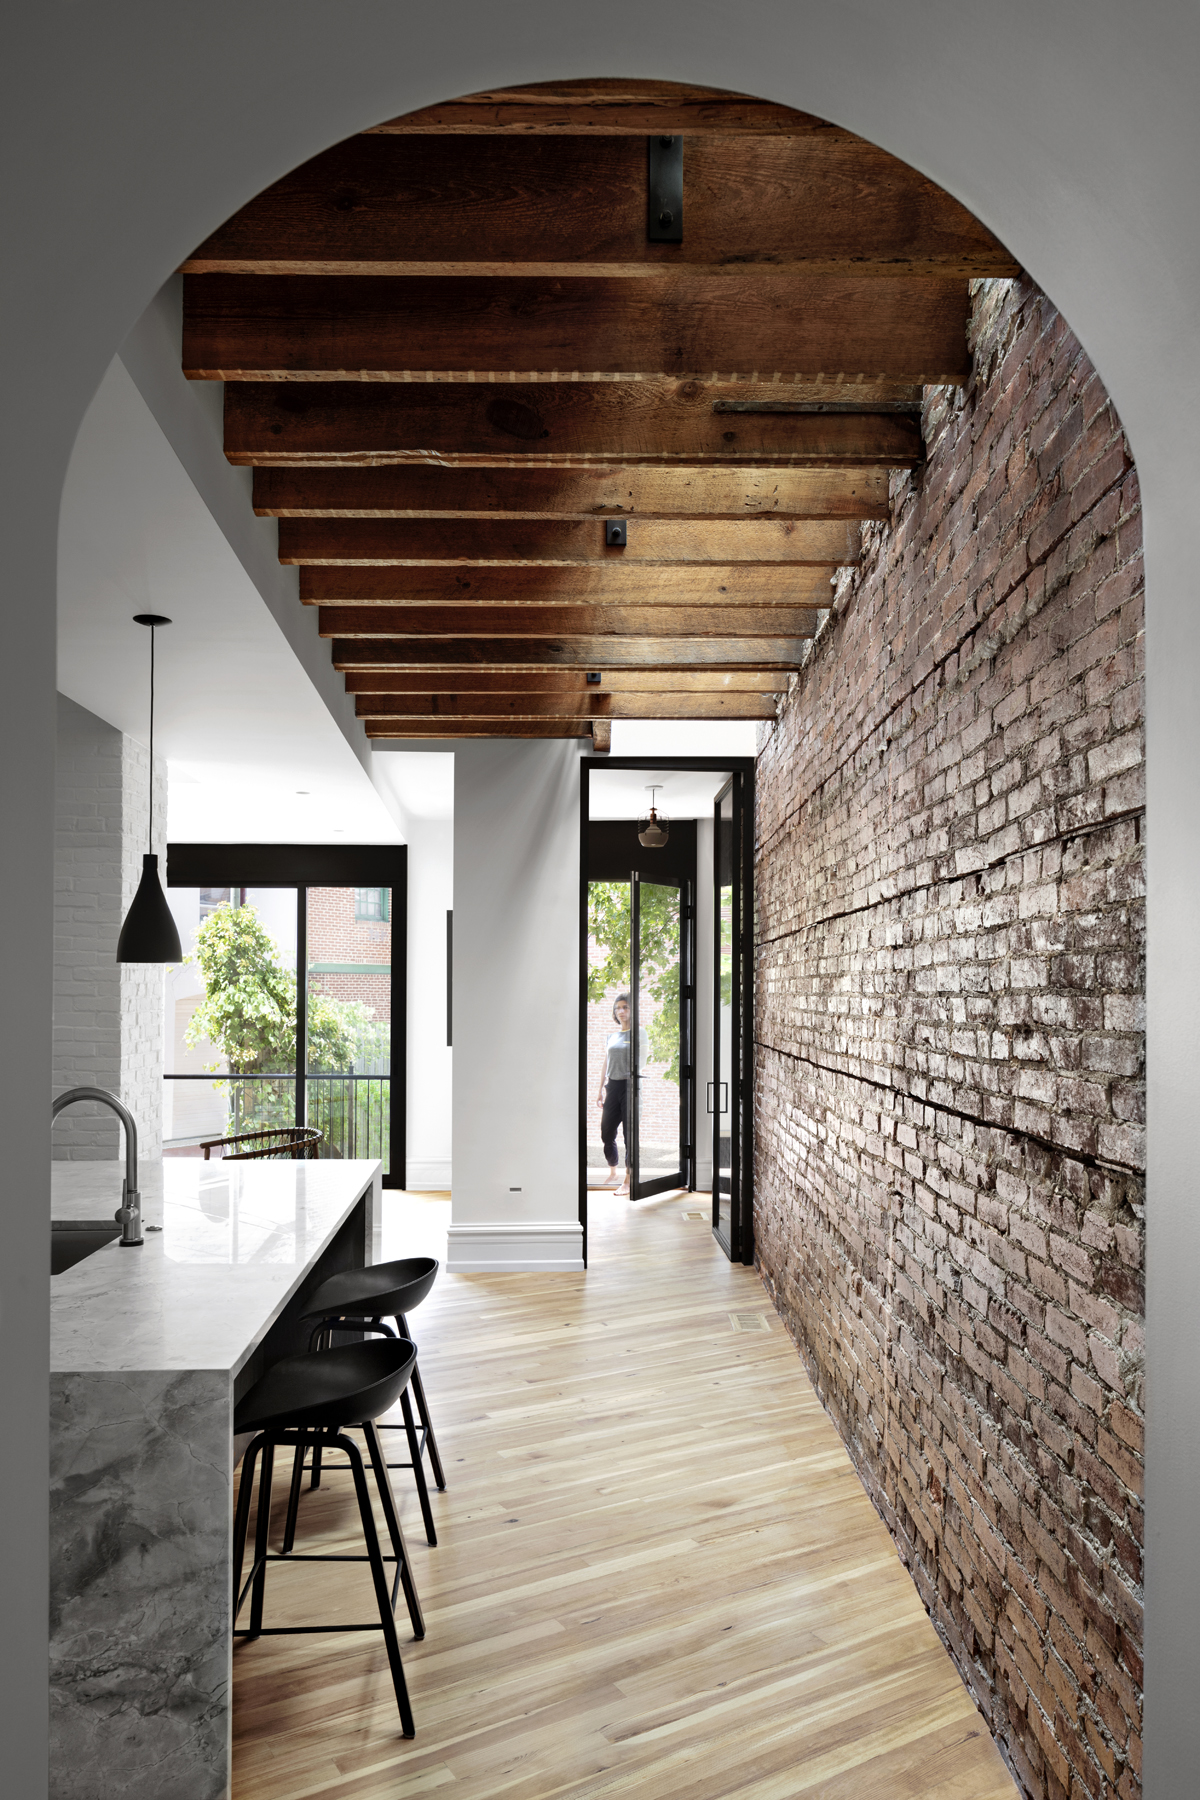 modern renovation of a historic townhouse where we exposed elements and added skylights above